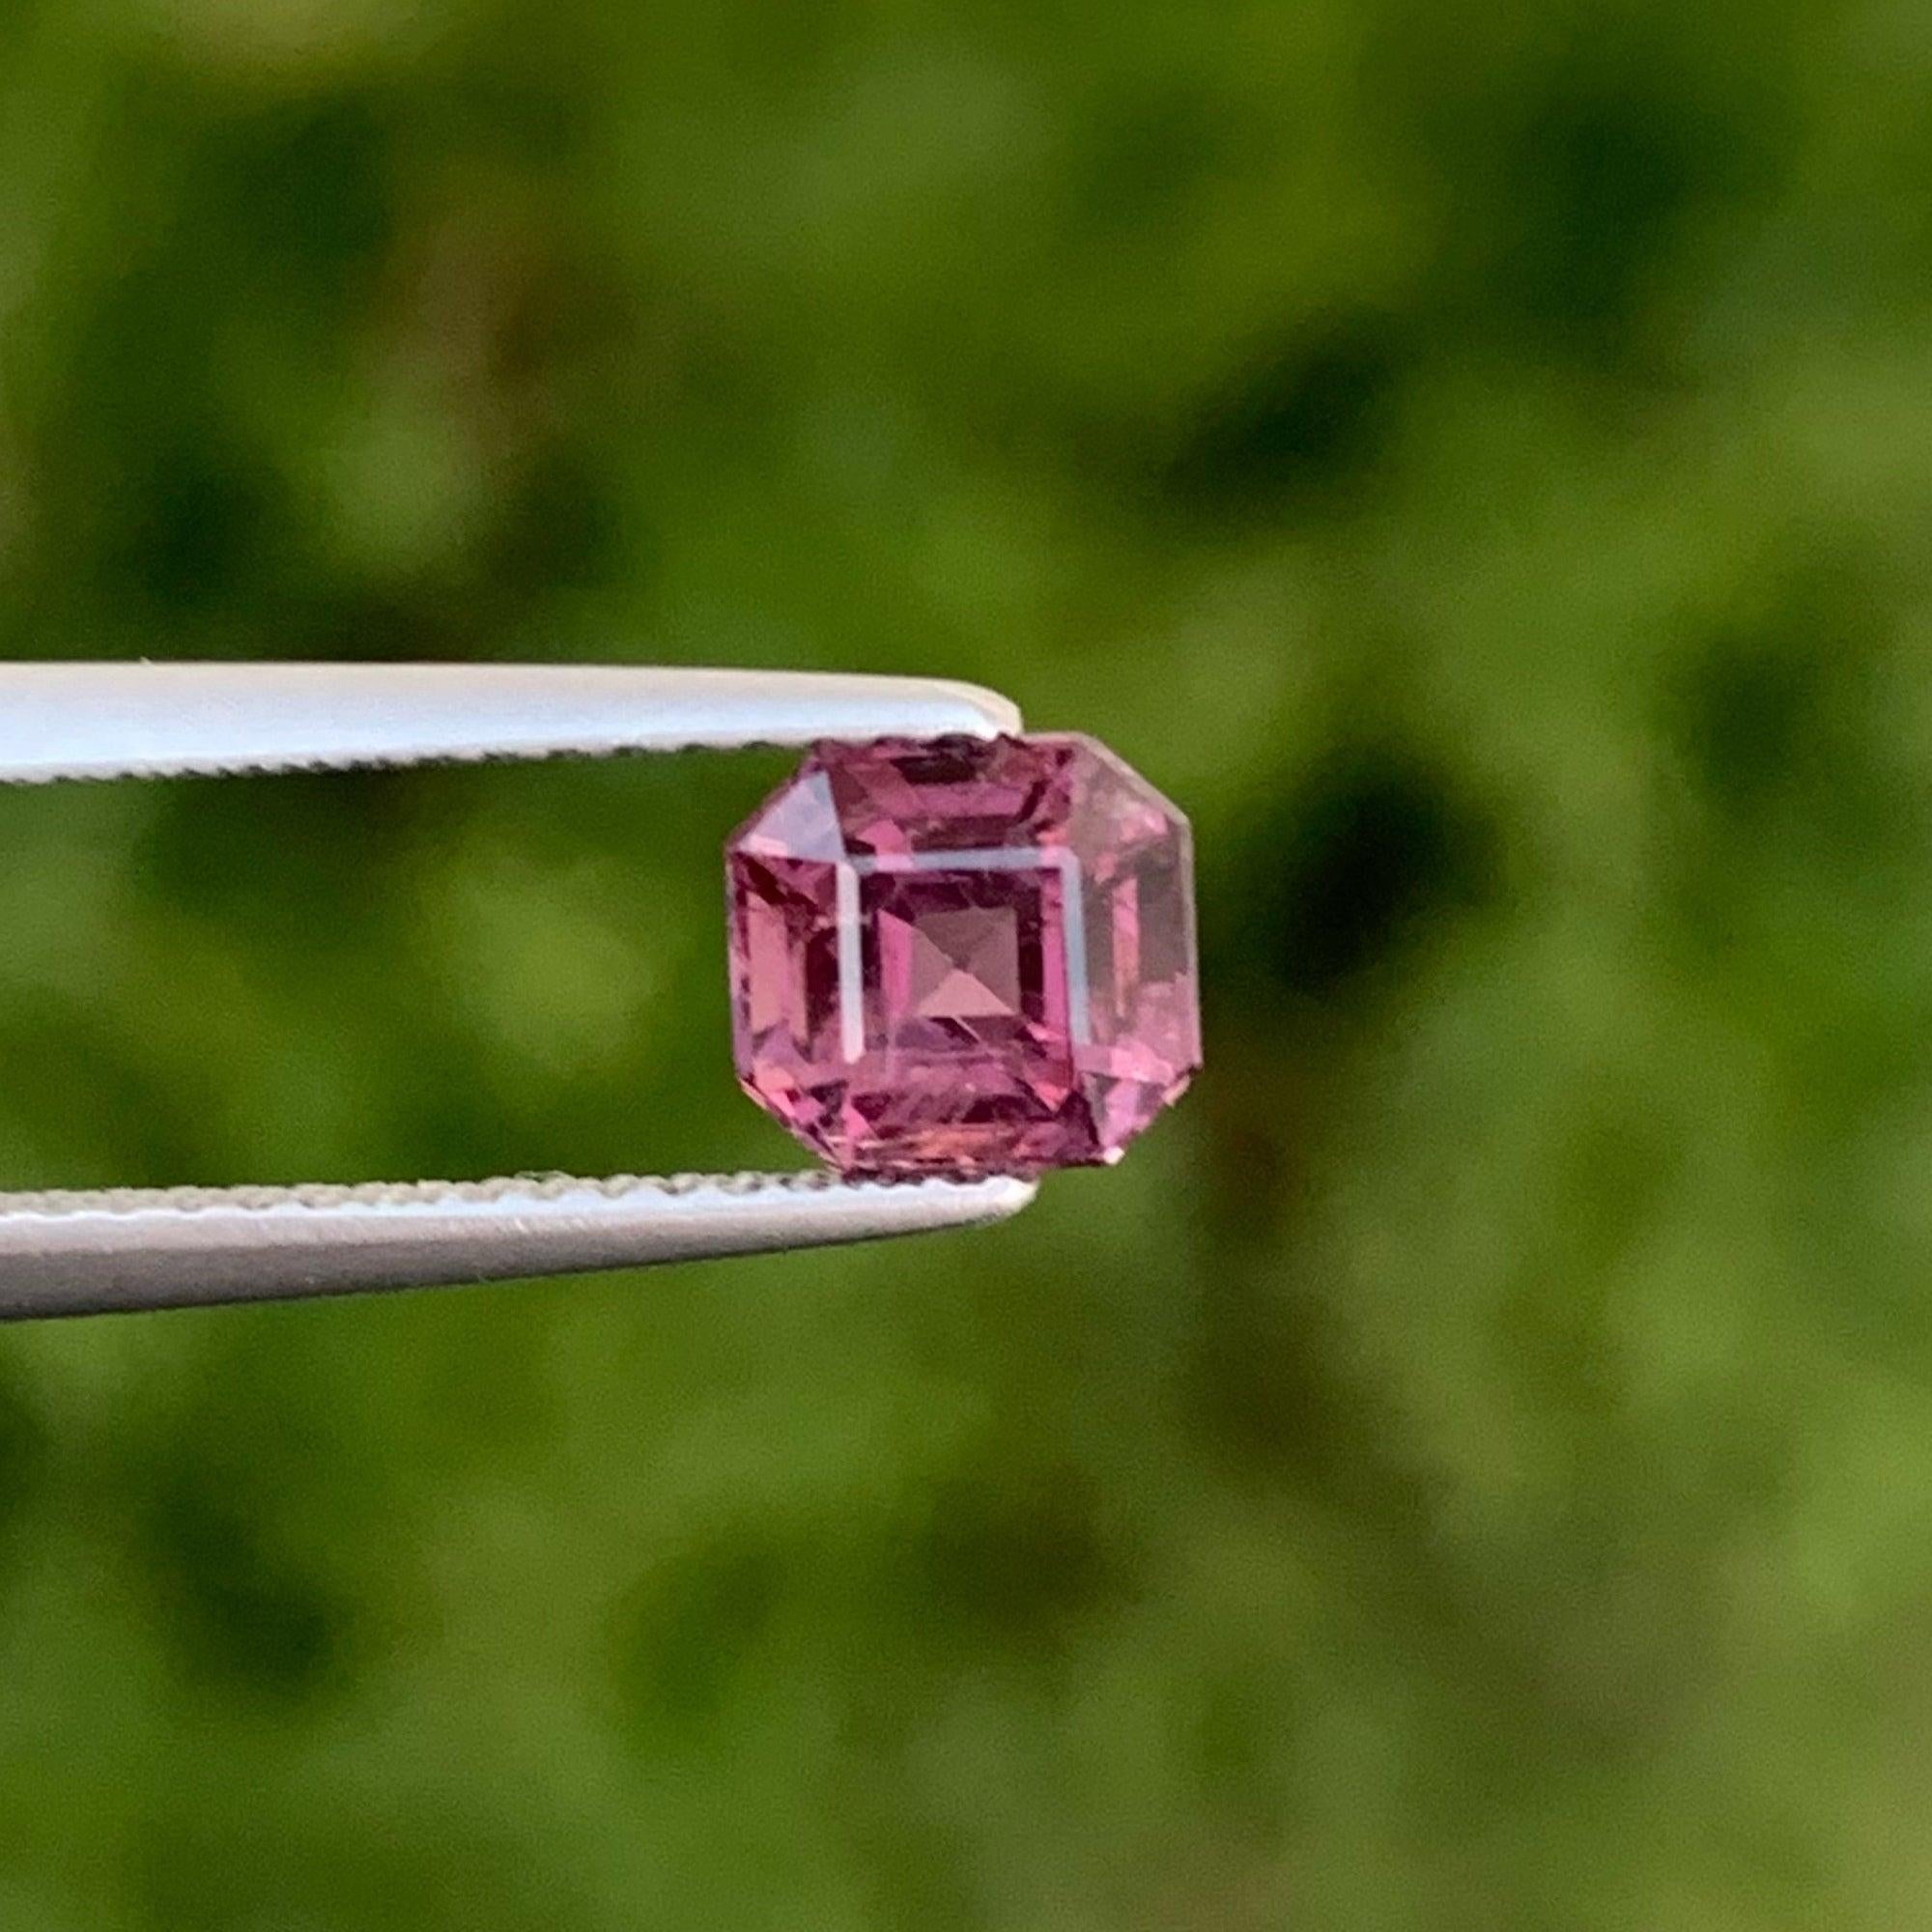 Natural Purple Cut Spinel Gem, available for sale at wholesale price, natural high-quality, 1.20 carats Loose certified Purple Spinel gemstone from Burma.

Product Information:
GEMSTONE TYPE:	Natural Purple Cut Spinel Gem
WEIGHT:	1.20